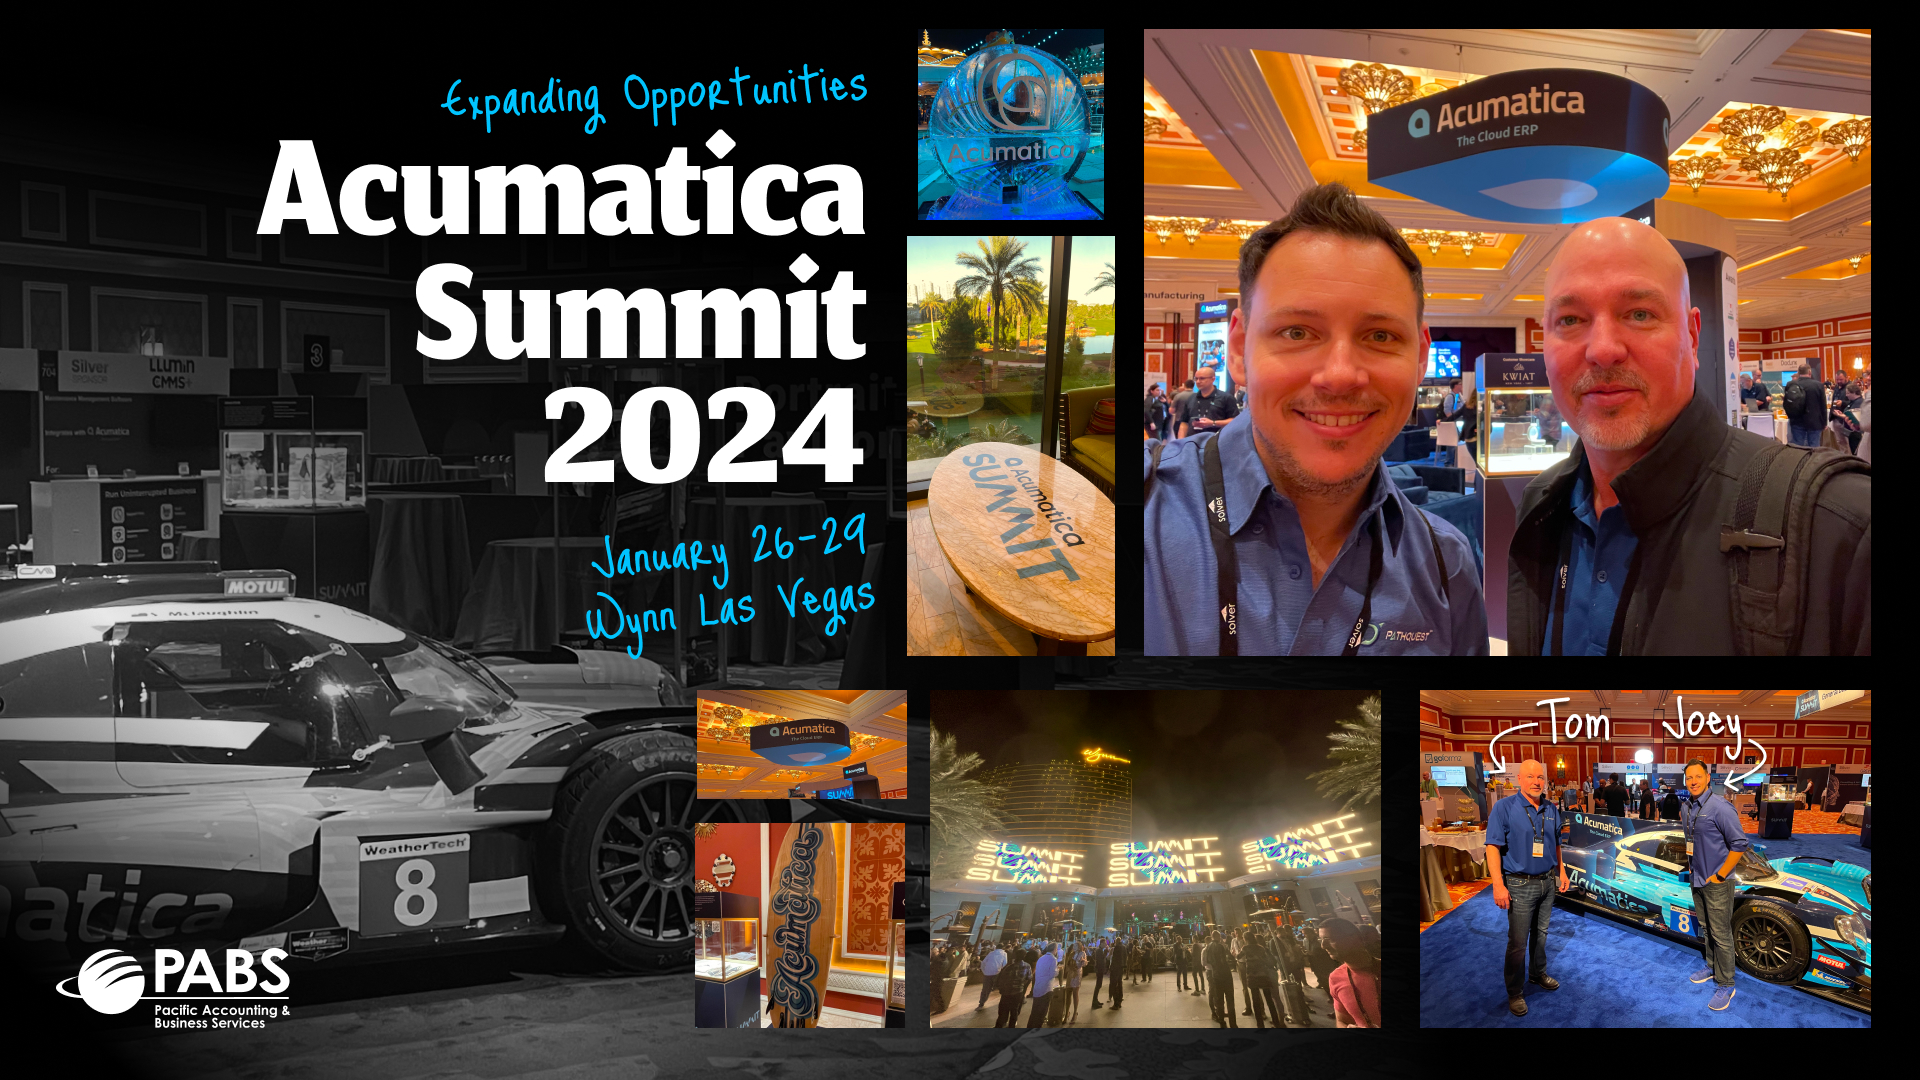 PABS Attends Acumatica Summit 2024